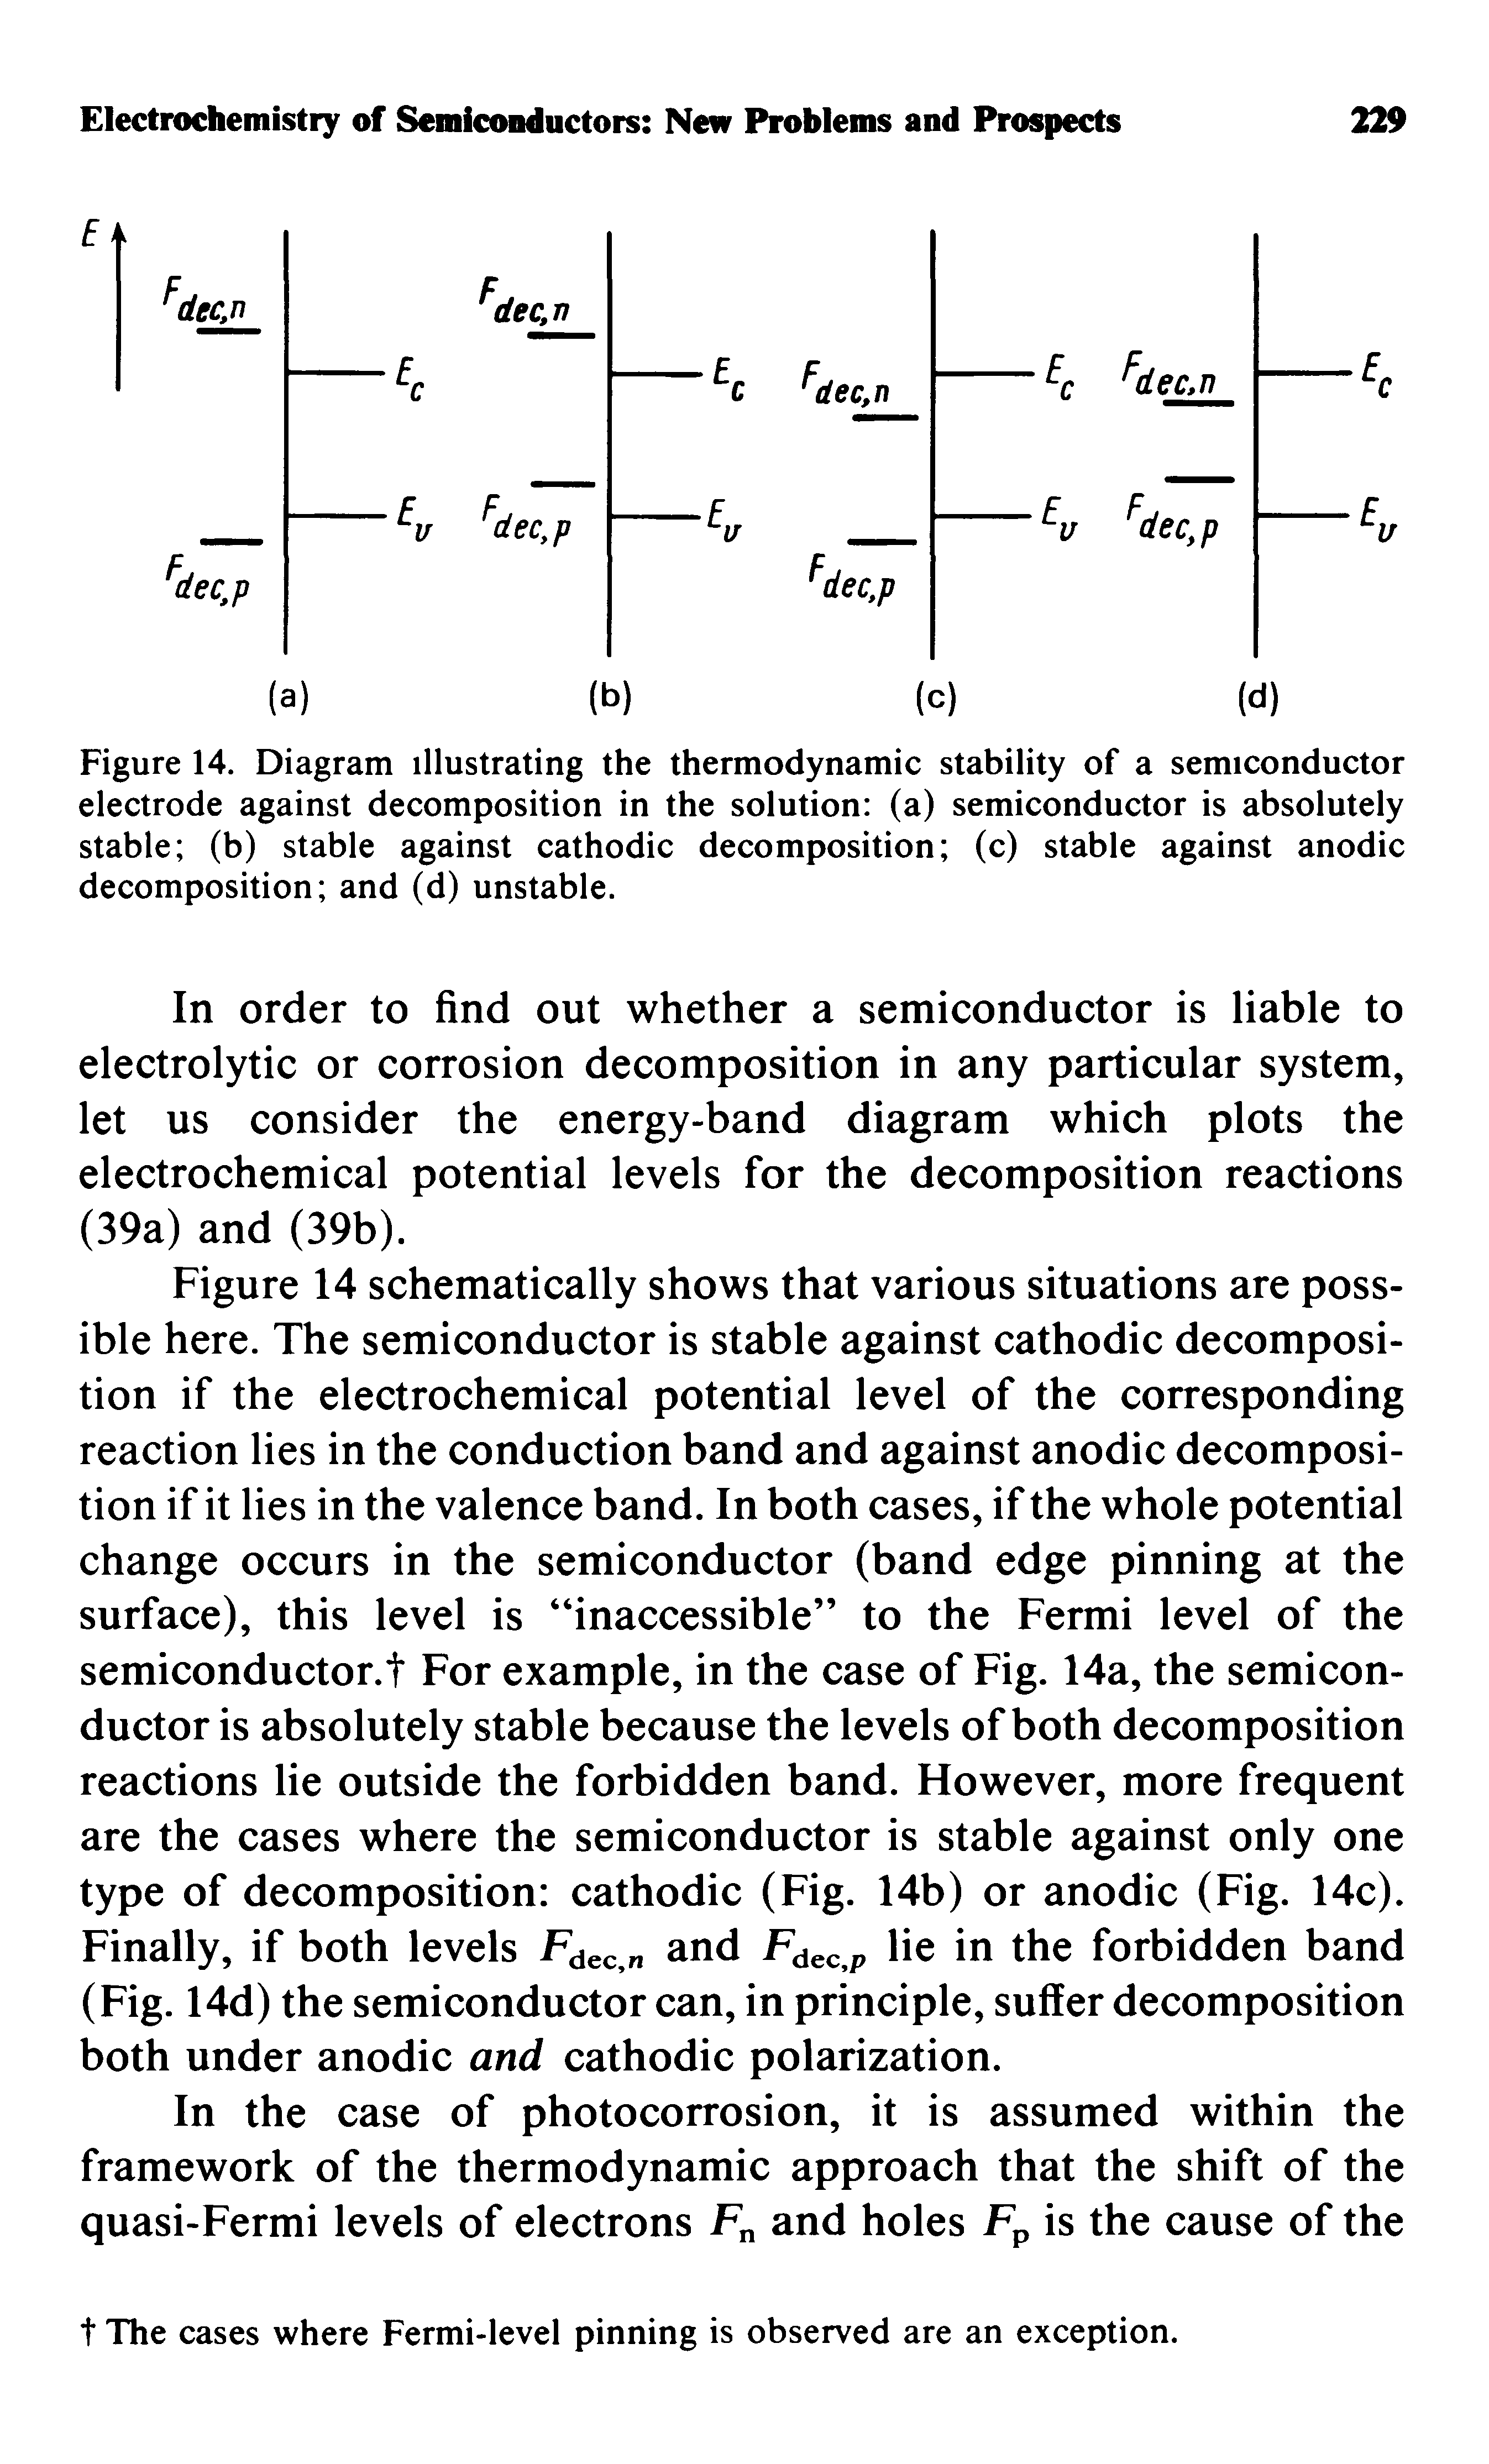 Figure 14 schematically shows that various situations are possible here. The semiconductor is stable against cathodic decomposition if the electrochemical potential level of the corresponding reaction lies in the conduction band and against anodic decomposition if it lies in the valence band. In both cases, if the whole potential change occurs in the semiconductor (band edge pinning at the surface), this level is inaccessible to the Fermi level of the semiconductor.t For example, in the case of Fig. 14a, the semiconductor is absolutely stable because the levels of both decomposition reactions lie outside the forbidden band. However, more frequent are the cases where the semiconductor is stable against only one type of decomposition cathodic (Fig. 14b) or anodic (Fig. 14c). Finally, if both levels Fdec, and Fjec.p He in the forbidden band (Fig. 14d) the semiconductor can, in principle, suffer decomposition both under anodic and cathodic polarization.